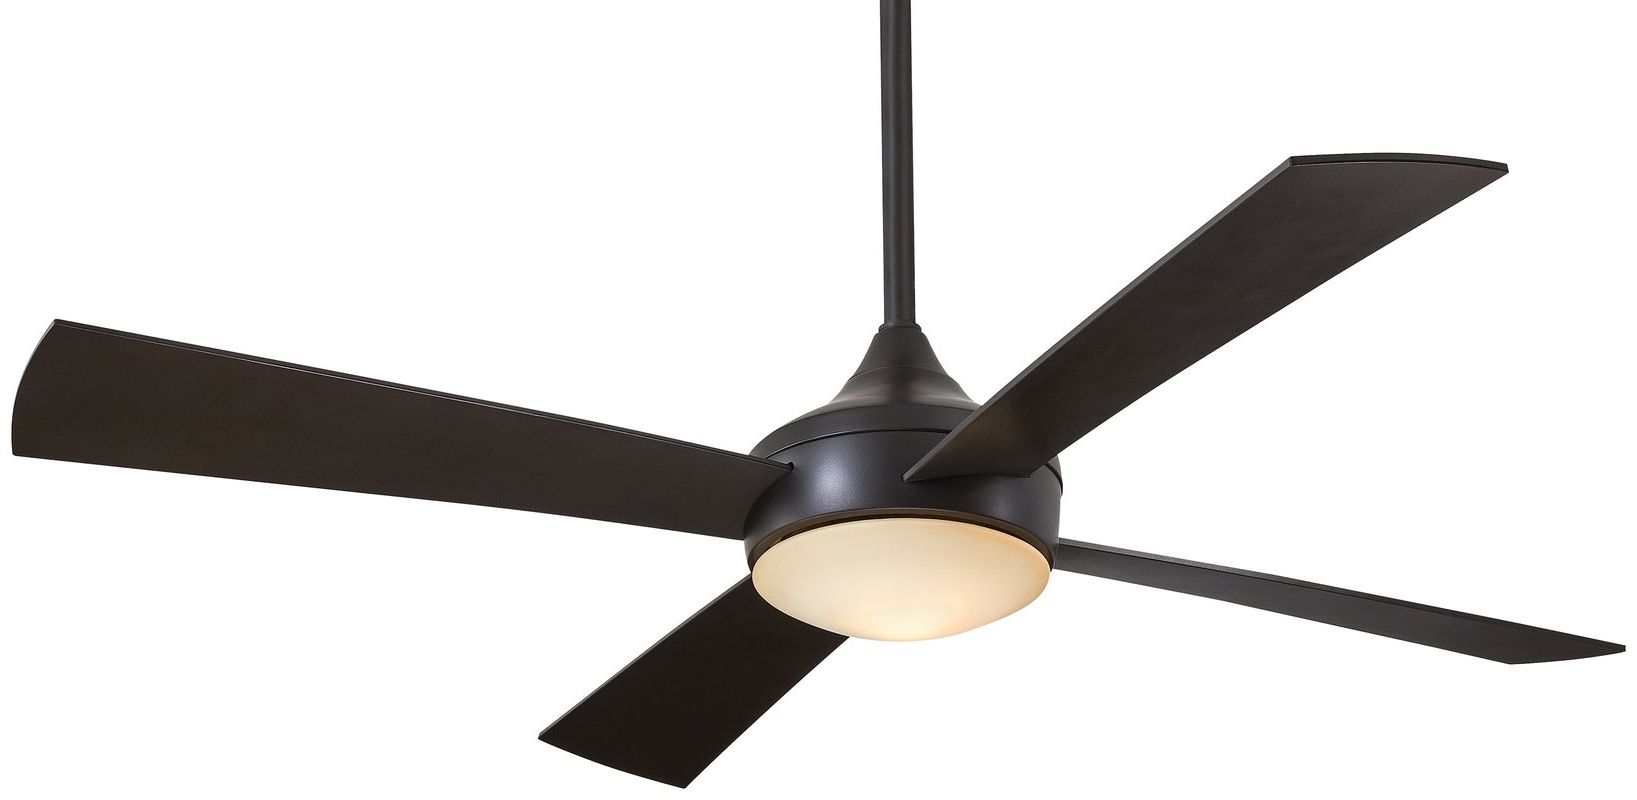 High Output Outdoor Ceiling Fans With Widely Used Outdoor Ceiling Fans You'll Love (View 14 of 20)